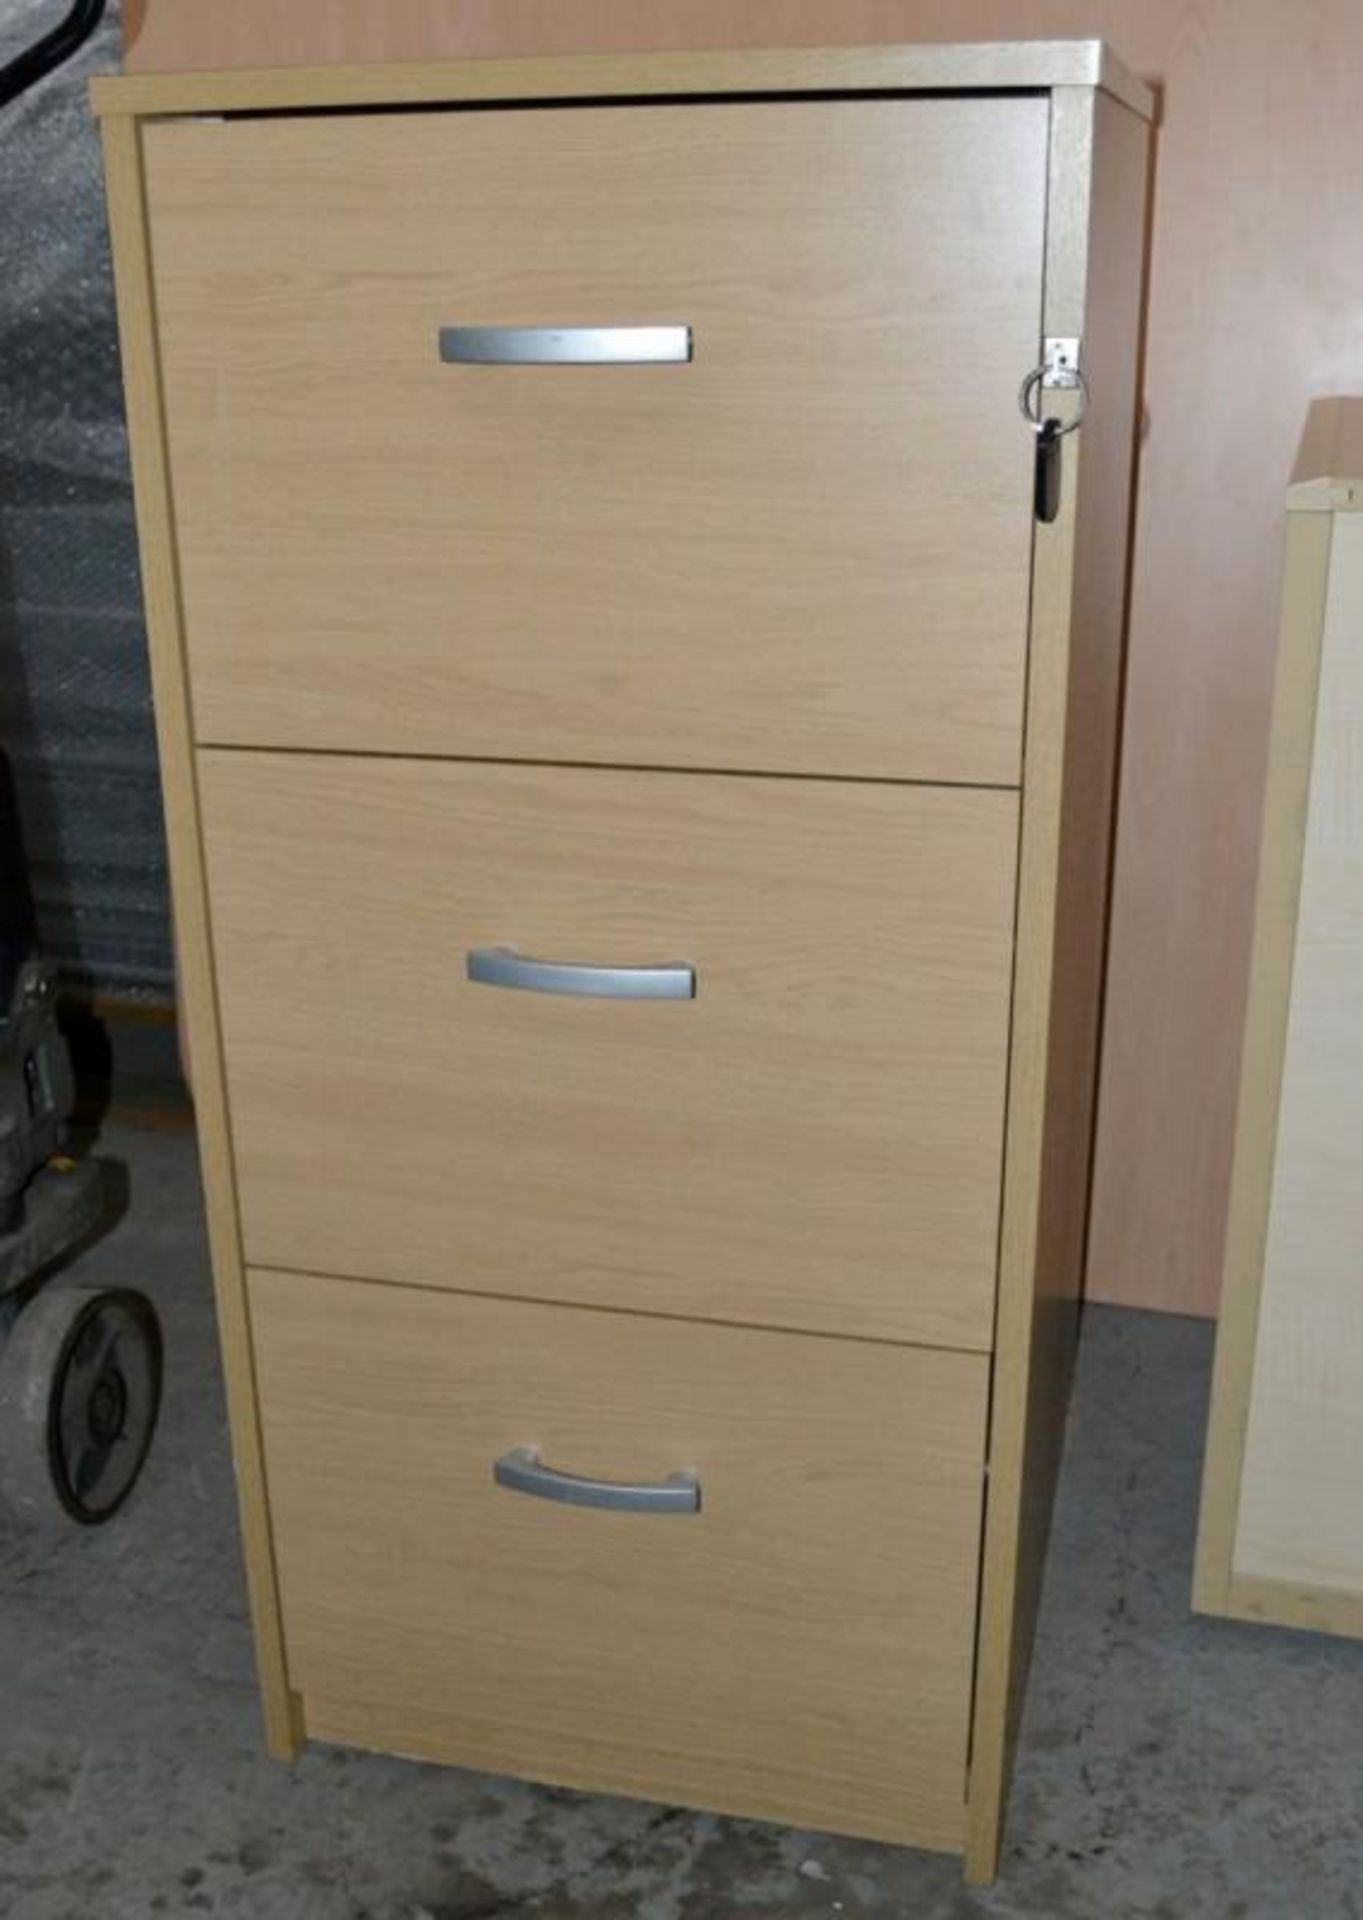 1 x 3-Door Lockable Filing Cabinet With Key - Dimensions: W48 x D60 x H102cm - Ref: MT939 - Very Goo - Image 2 of 5